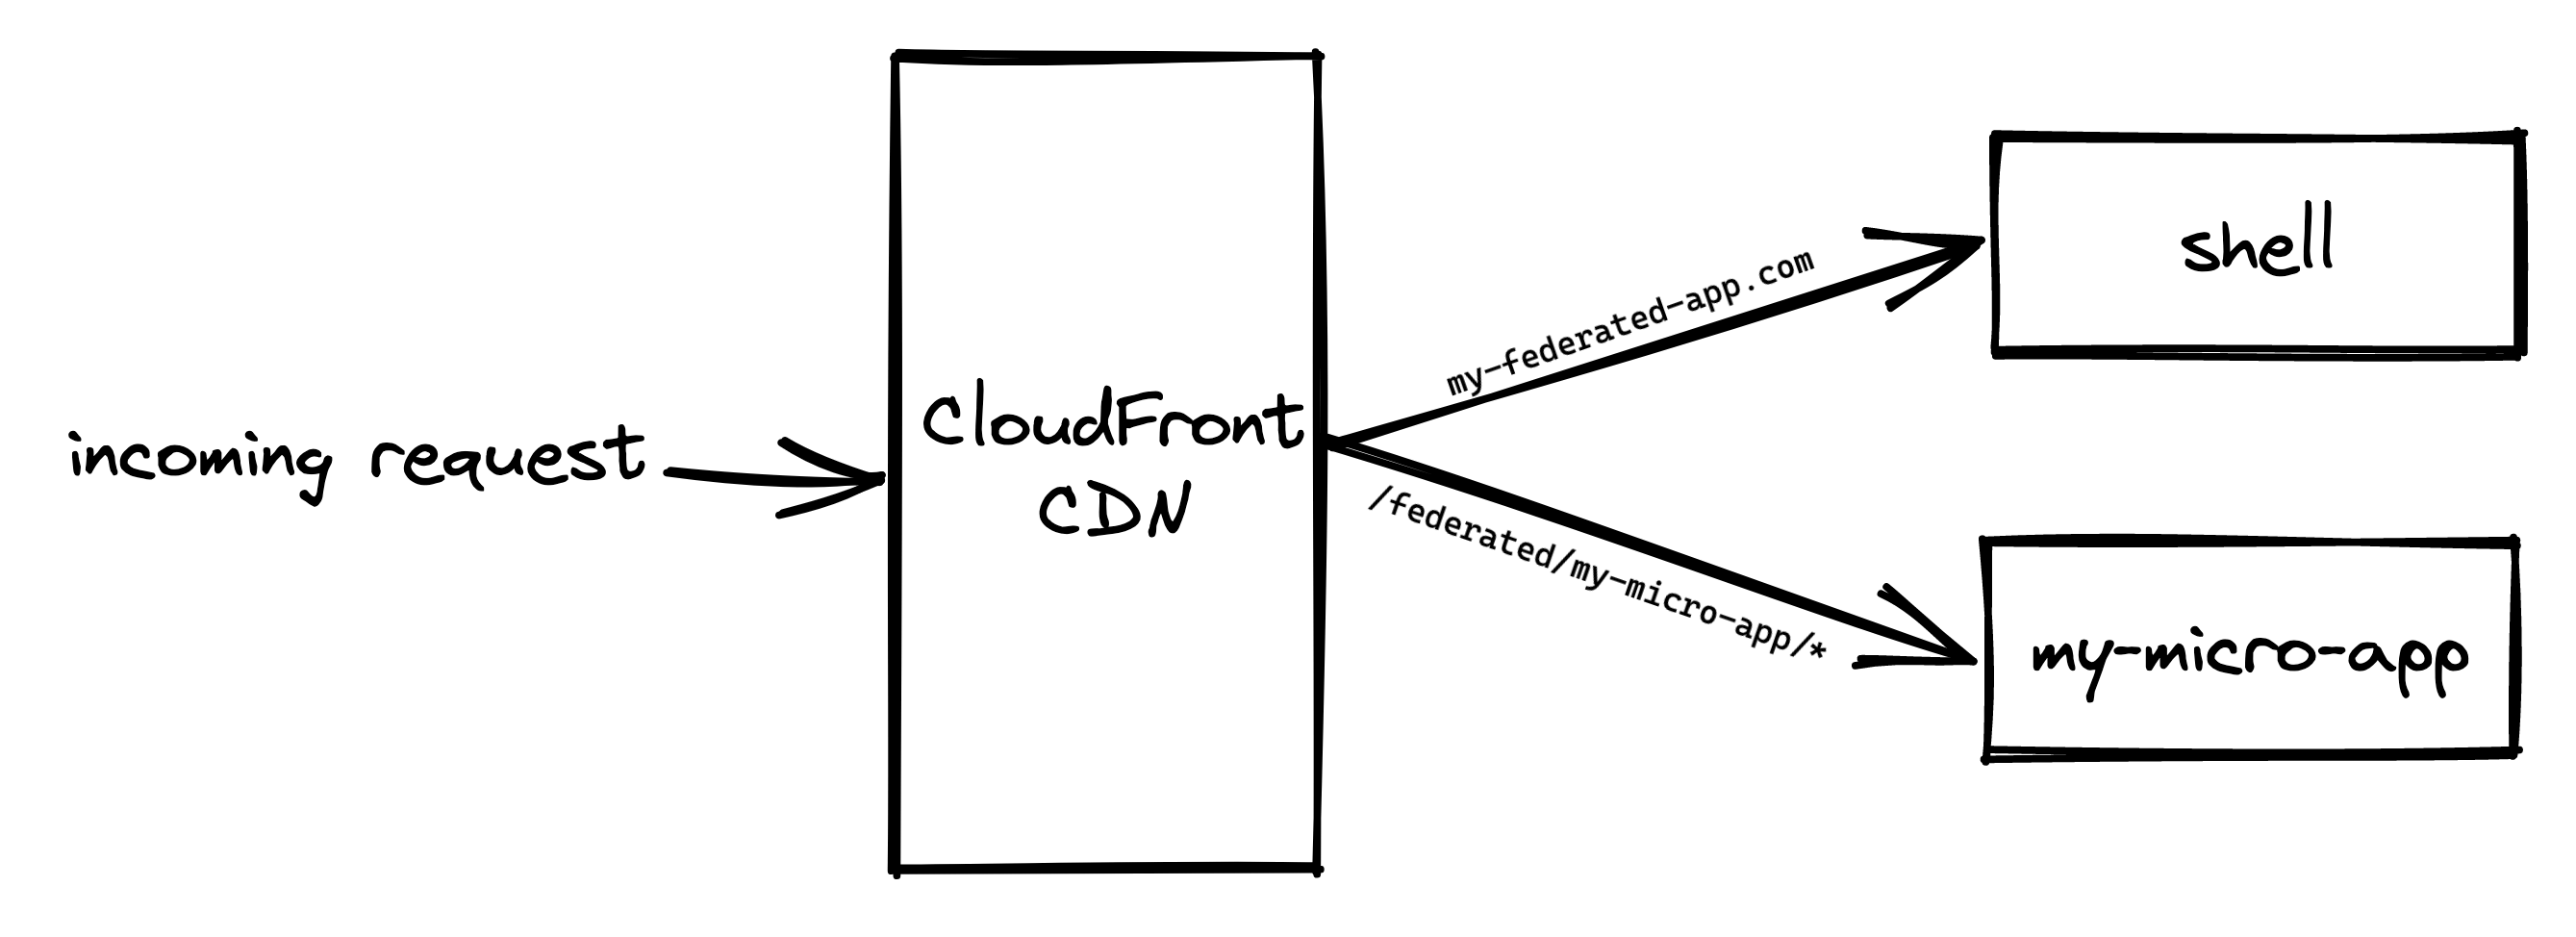 Diagram showing redirection based on path in CloudFront